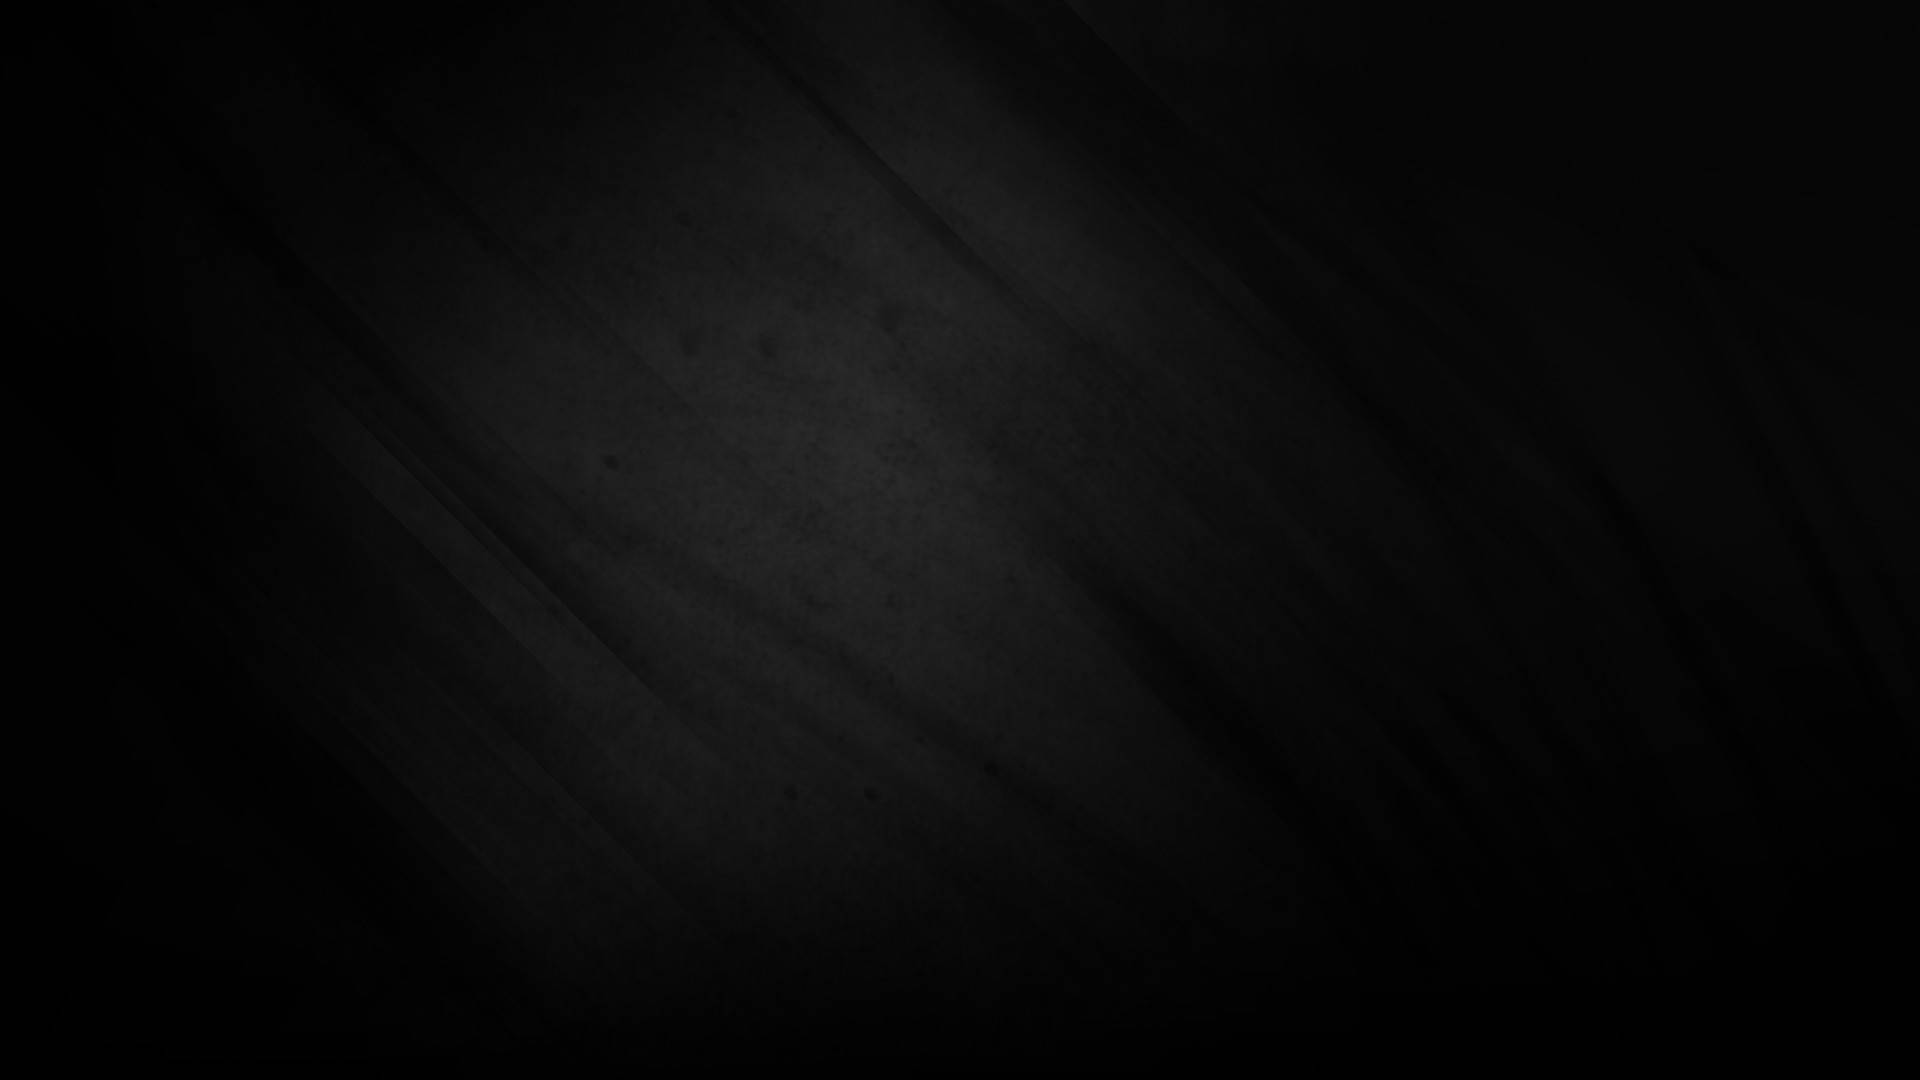 Solid Black Steel Surface Background